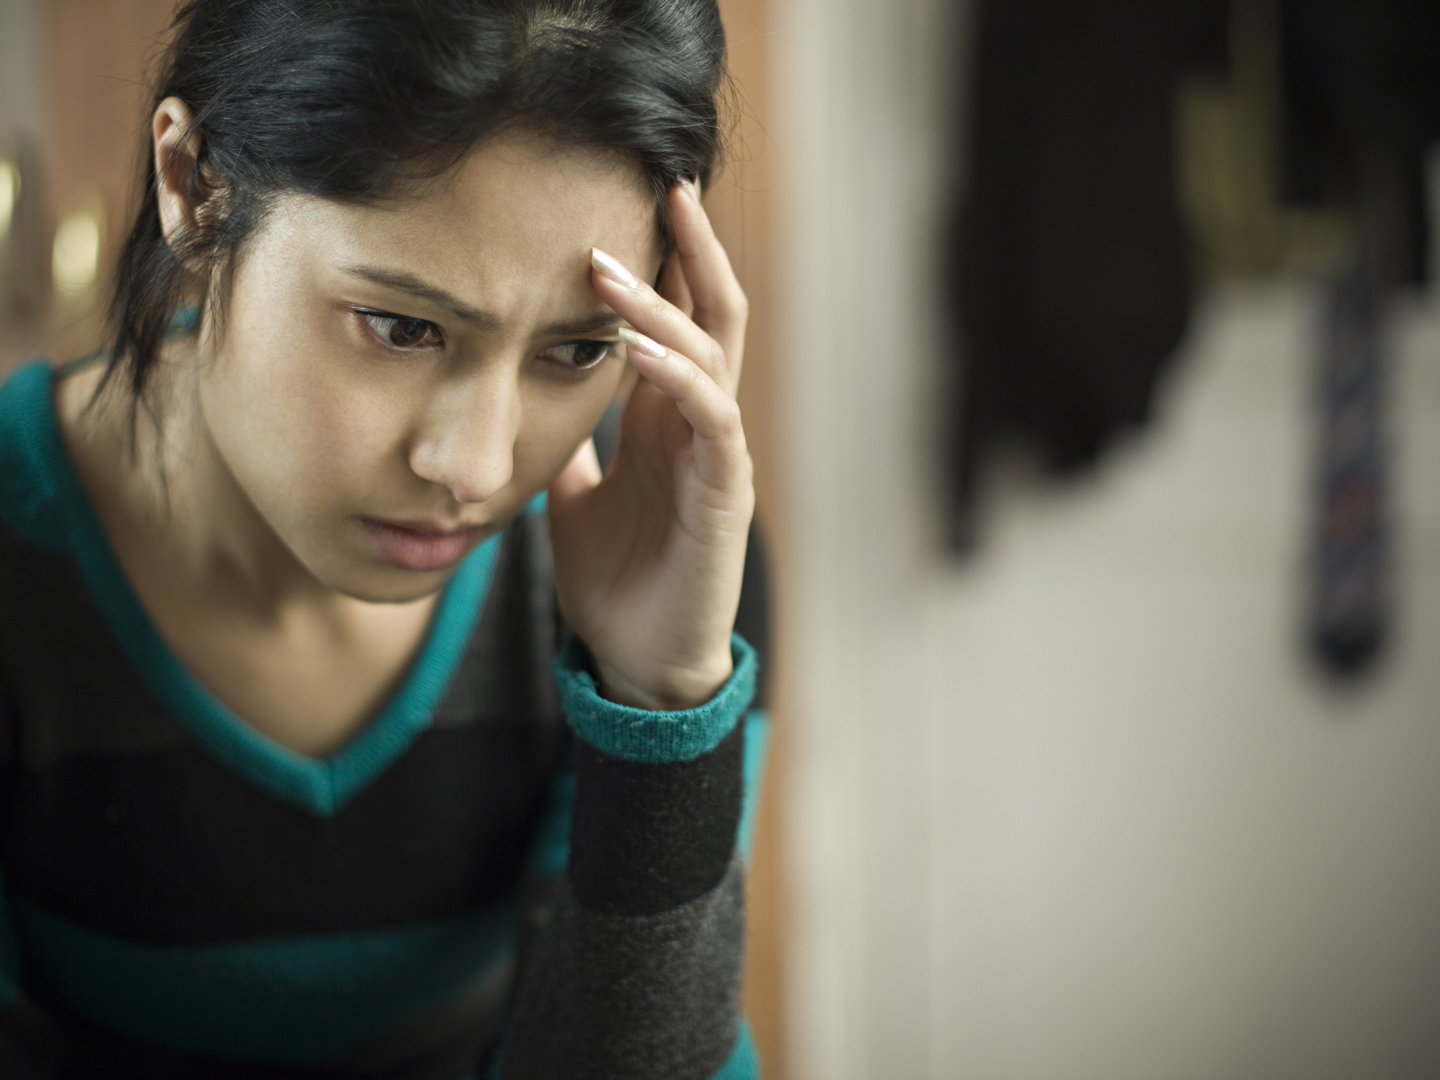 Indoor low key image of a serene, stressed young woman feeling headache and thinking by touching her head and looking down with blank expression. She is wearing a sweater. One person, waist up, horizontal composition with selective focus and copy space.